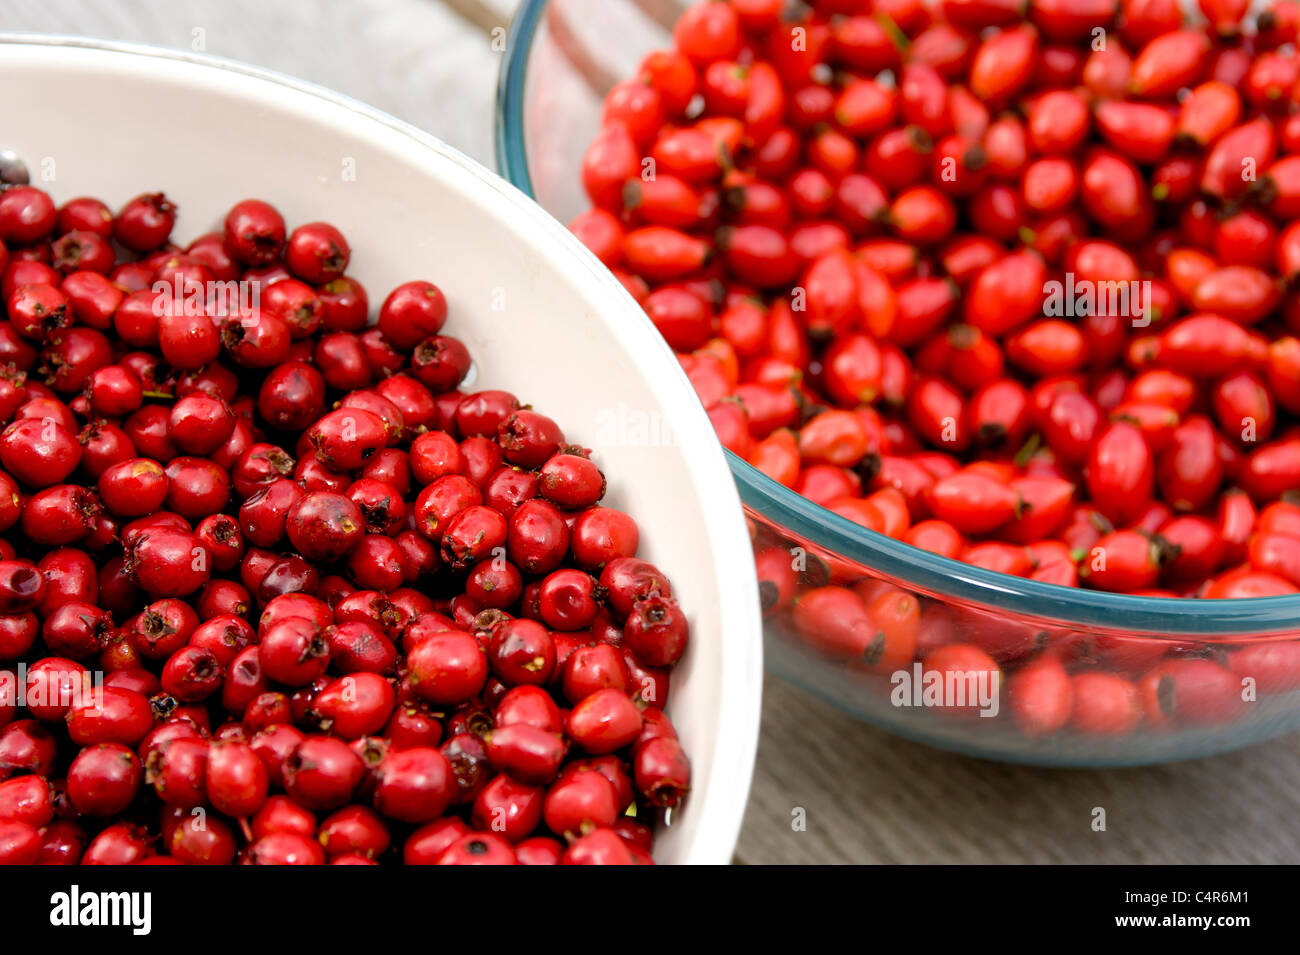 Harvested rose hip and haw berries. Stock Photo